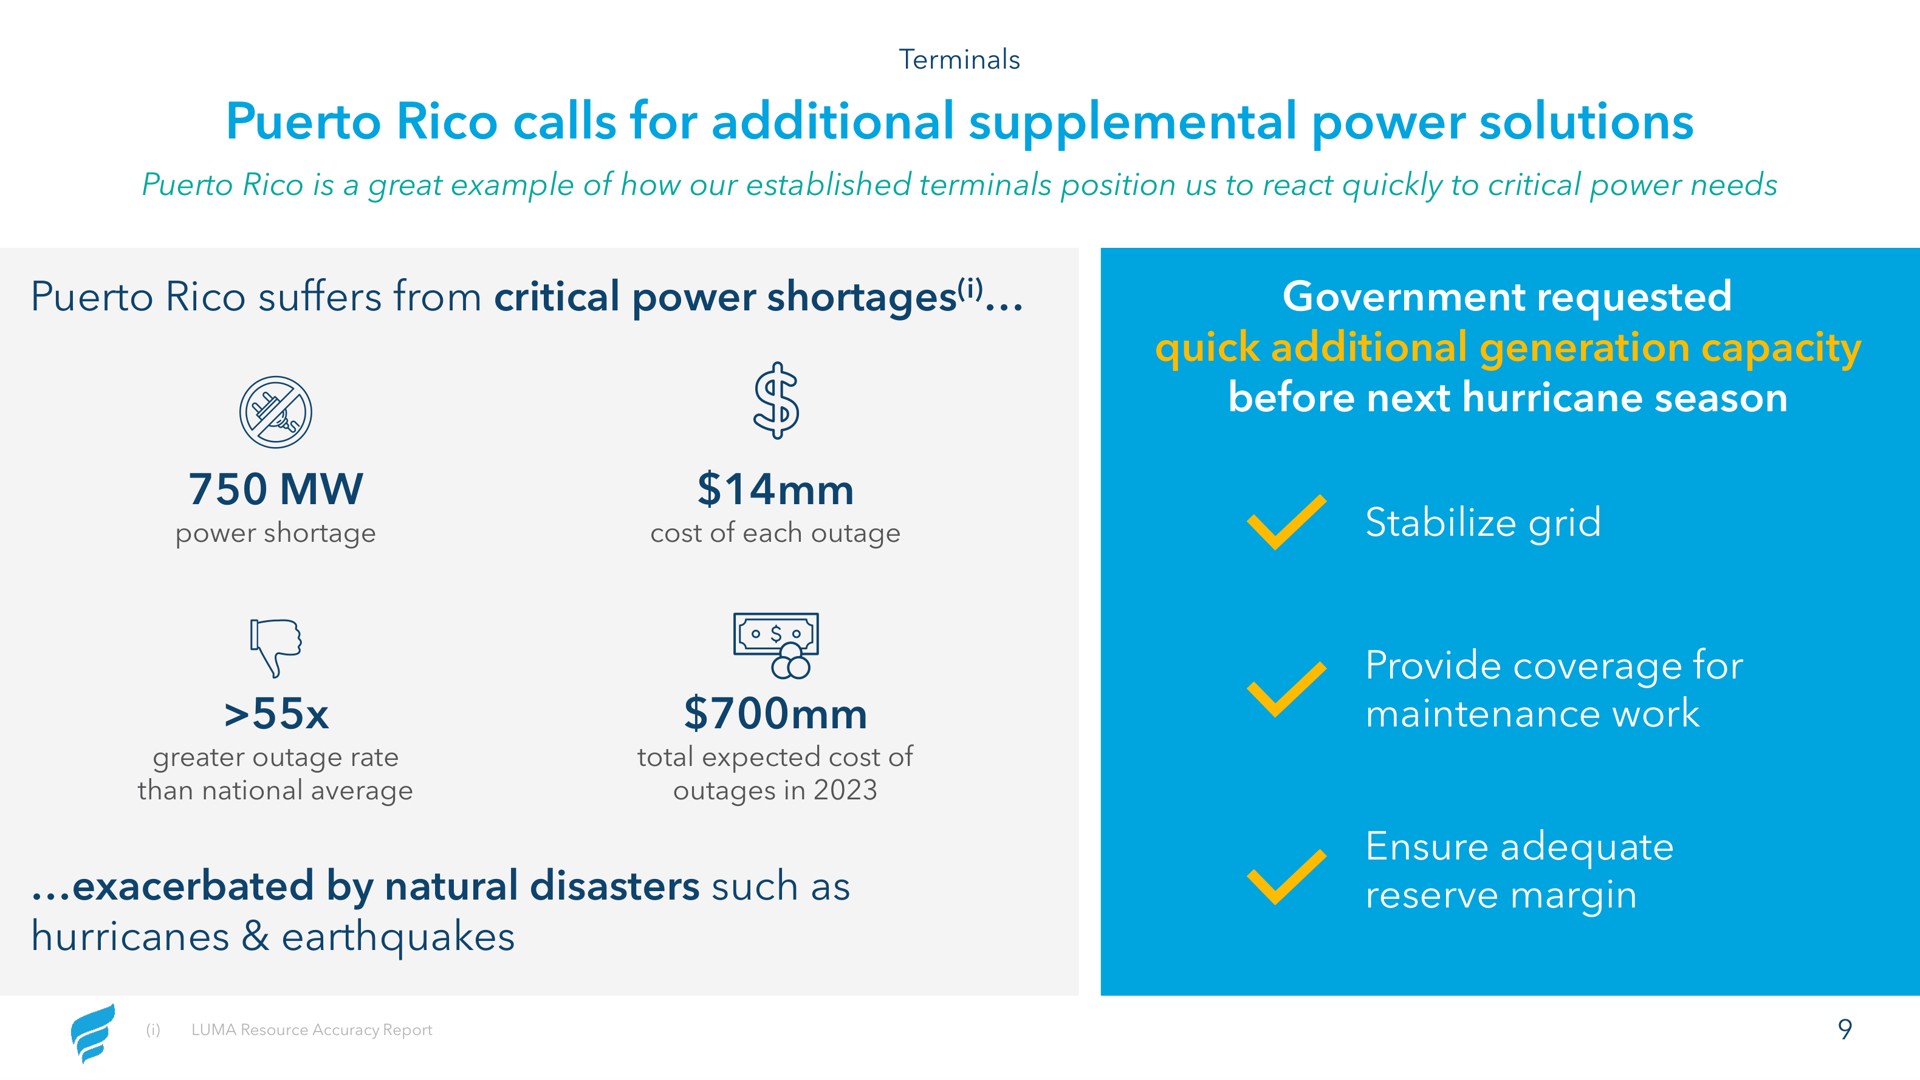 calls for additional supplemental power solutions suffers from critical power shortages i government requested quick additional generation capacity before next hurricane season stabilize grid exacerbated by natural disasters such as hurricanes earthquakes provide coverage for maintenance work ensure adequate reserve margin | NewFortress Energy